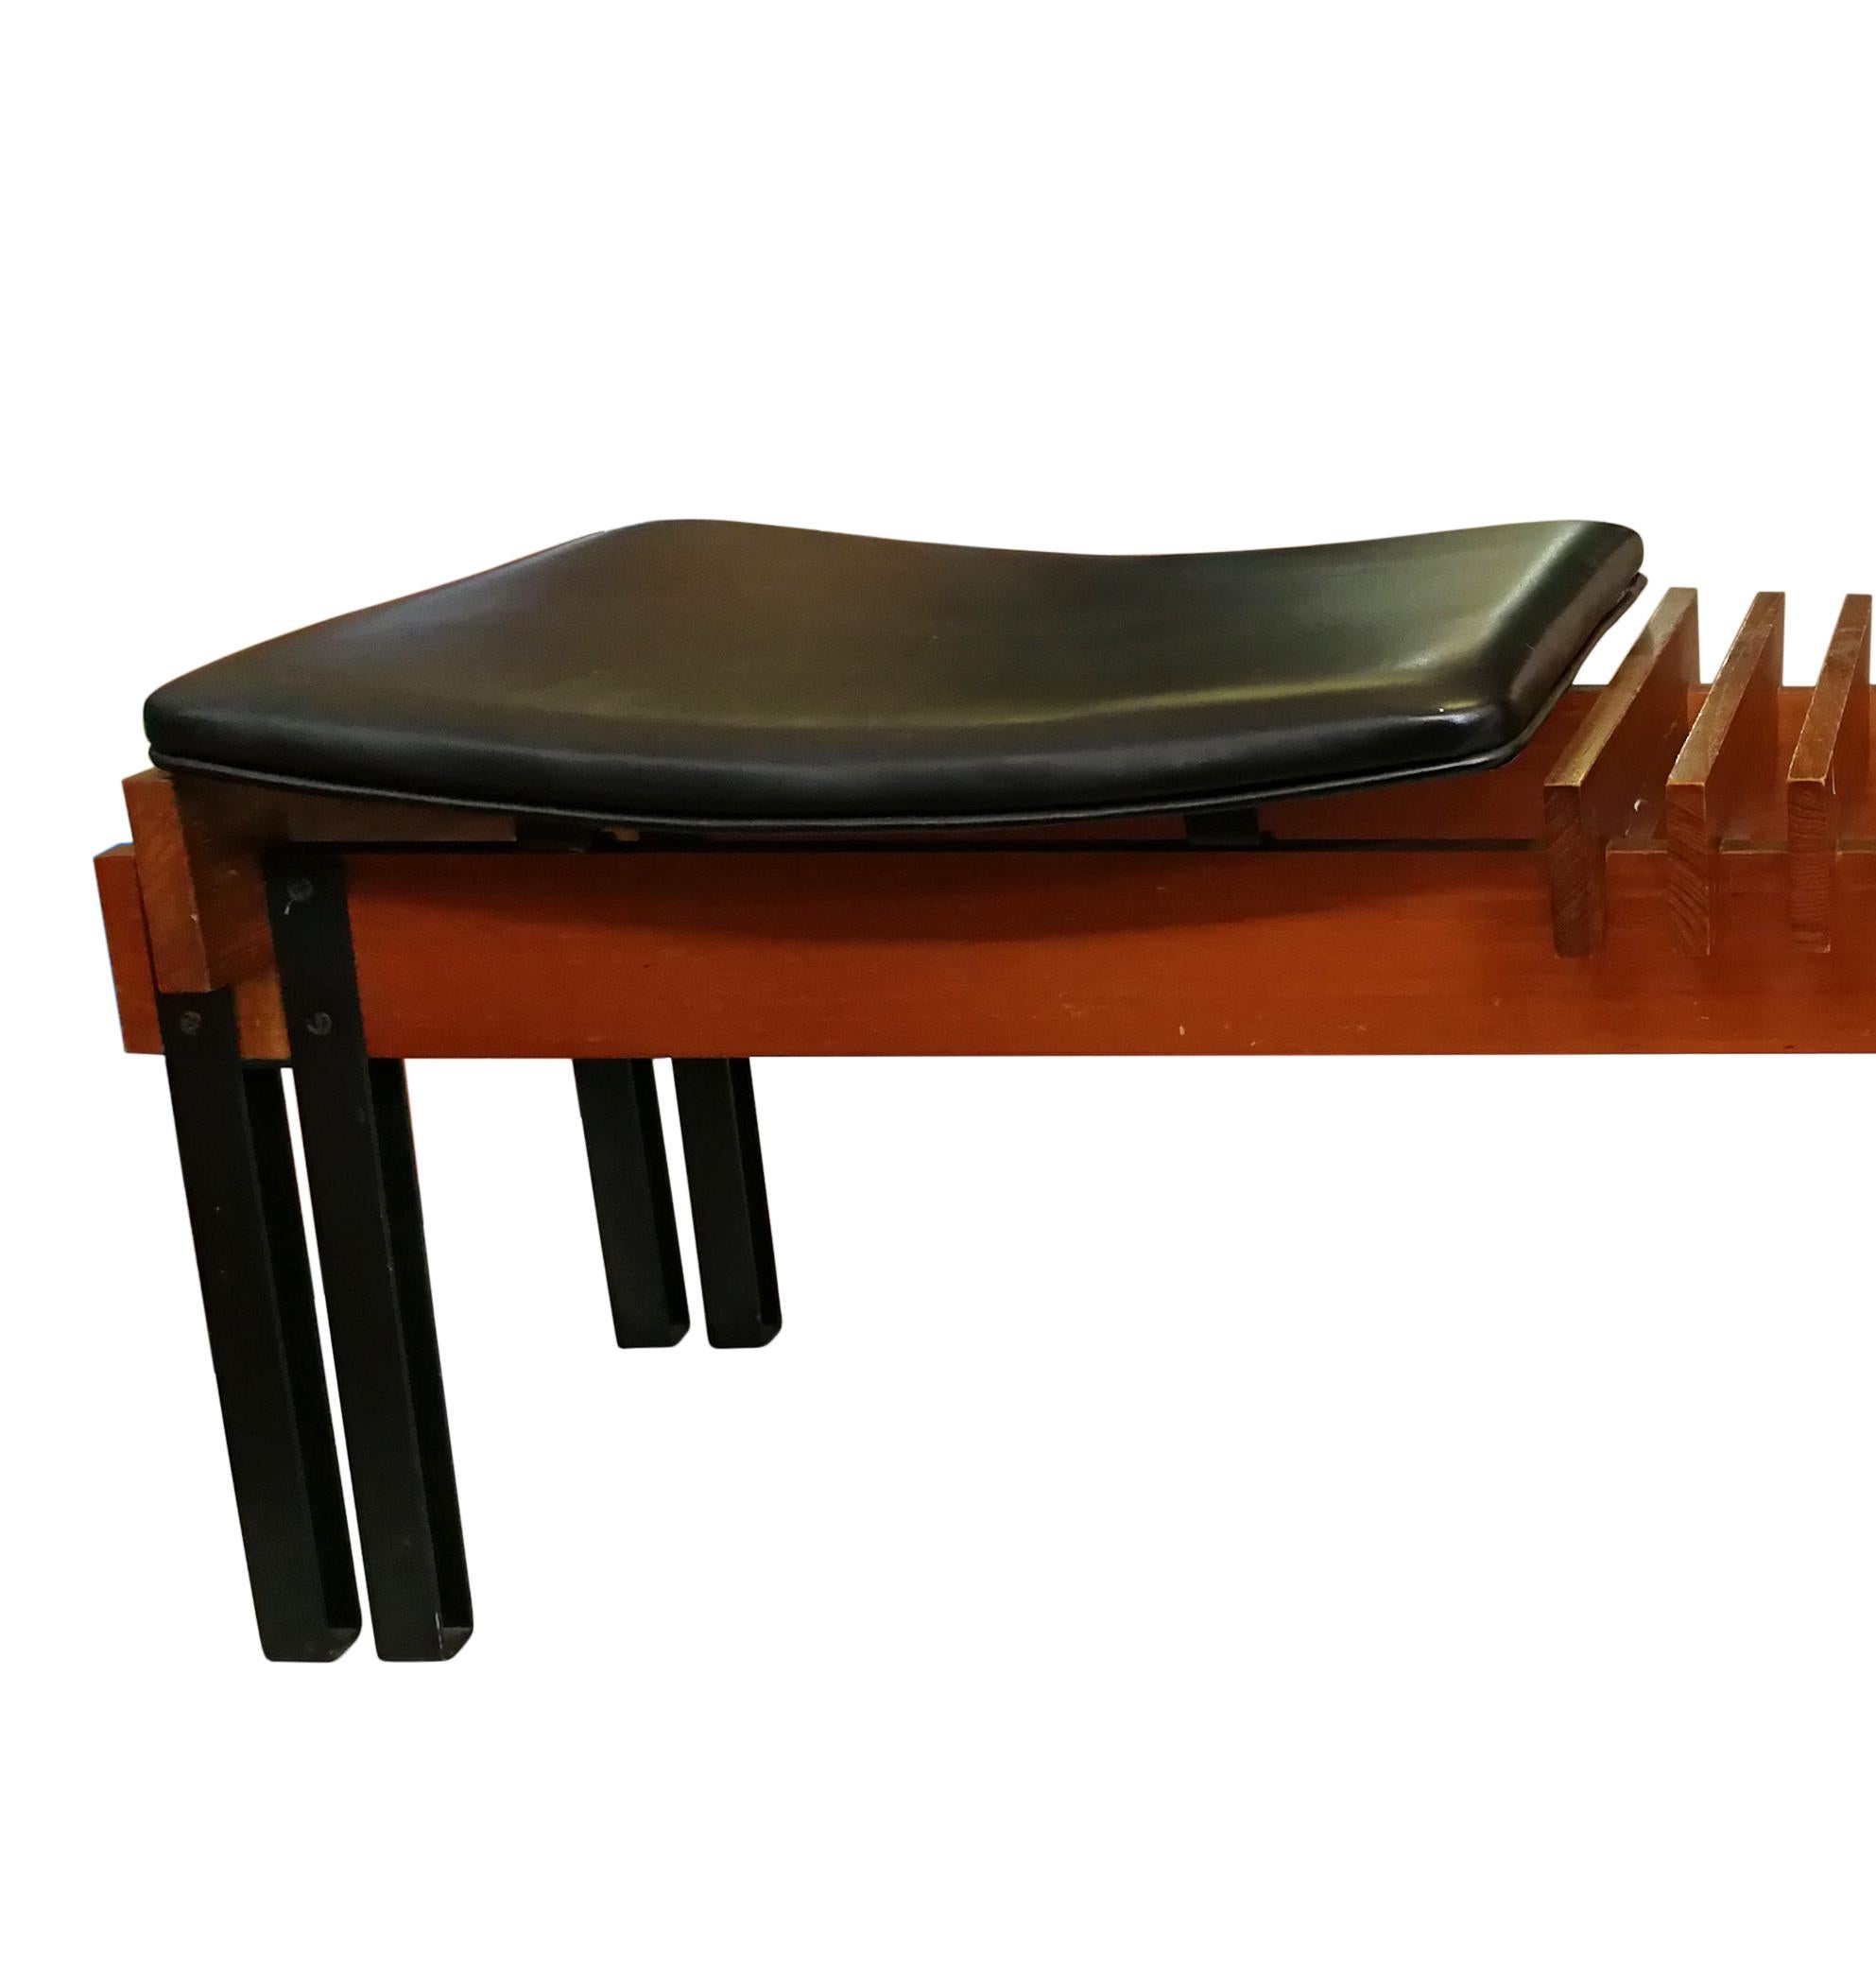 Mid-20th Century Vintage Wood Teak Bench in Lacquered Metal, Italian Production, 1960s For Sale